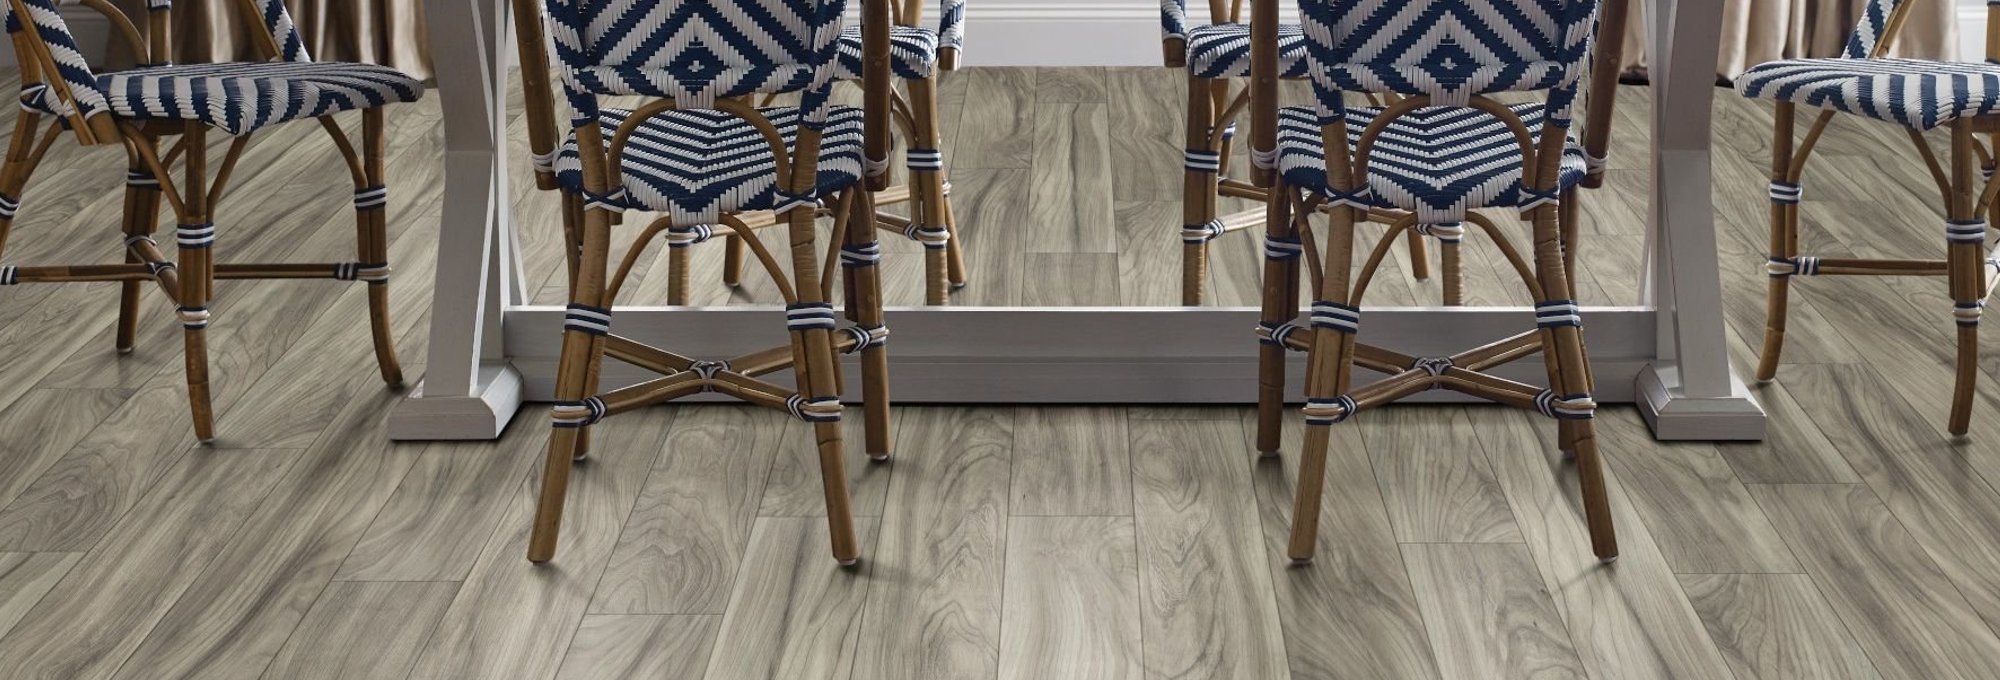 dining room from Goodrich Floor Coverings Inc in Salt Lake City